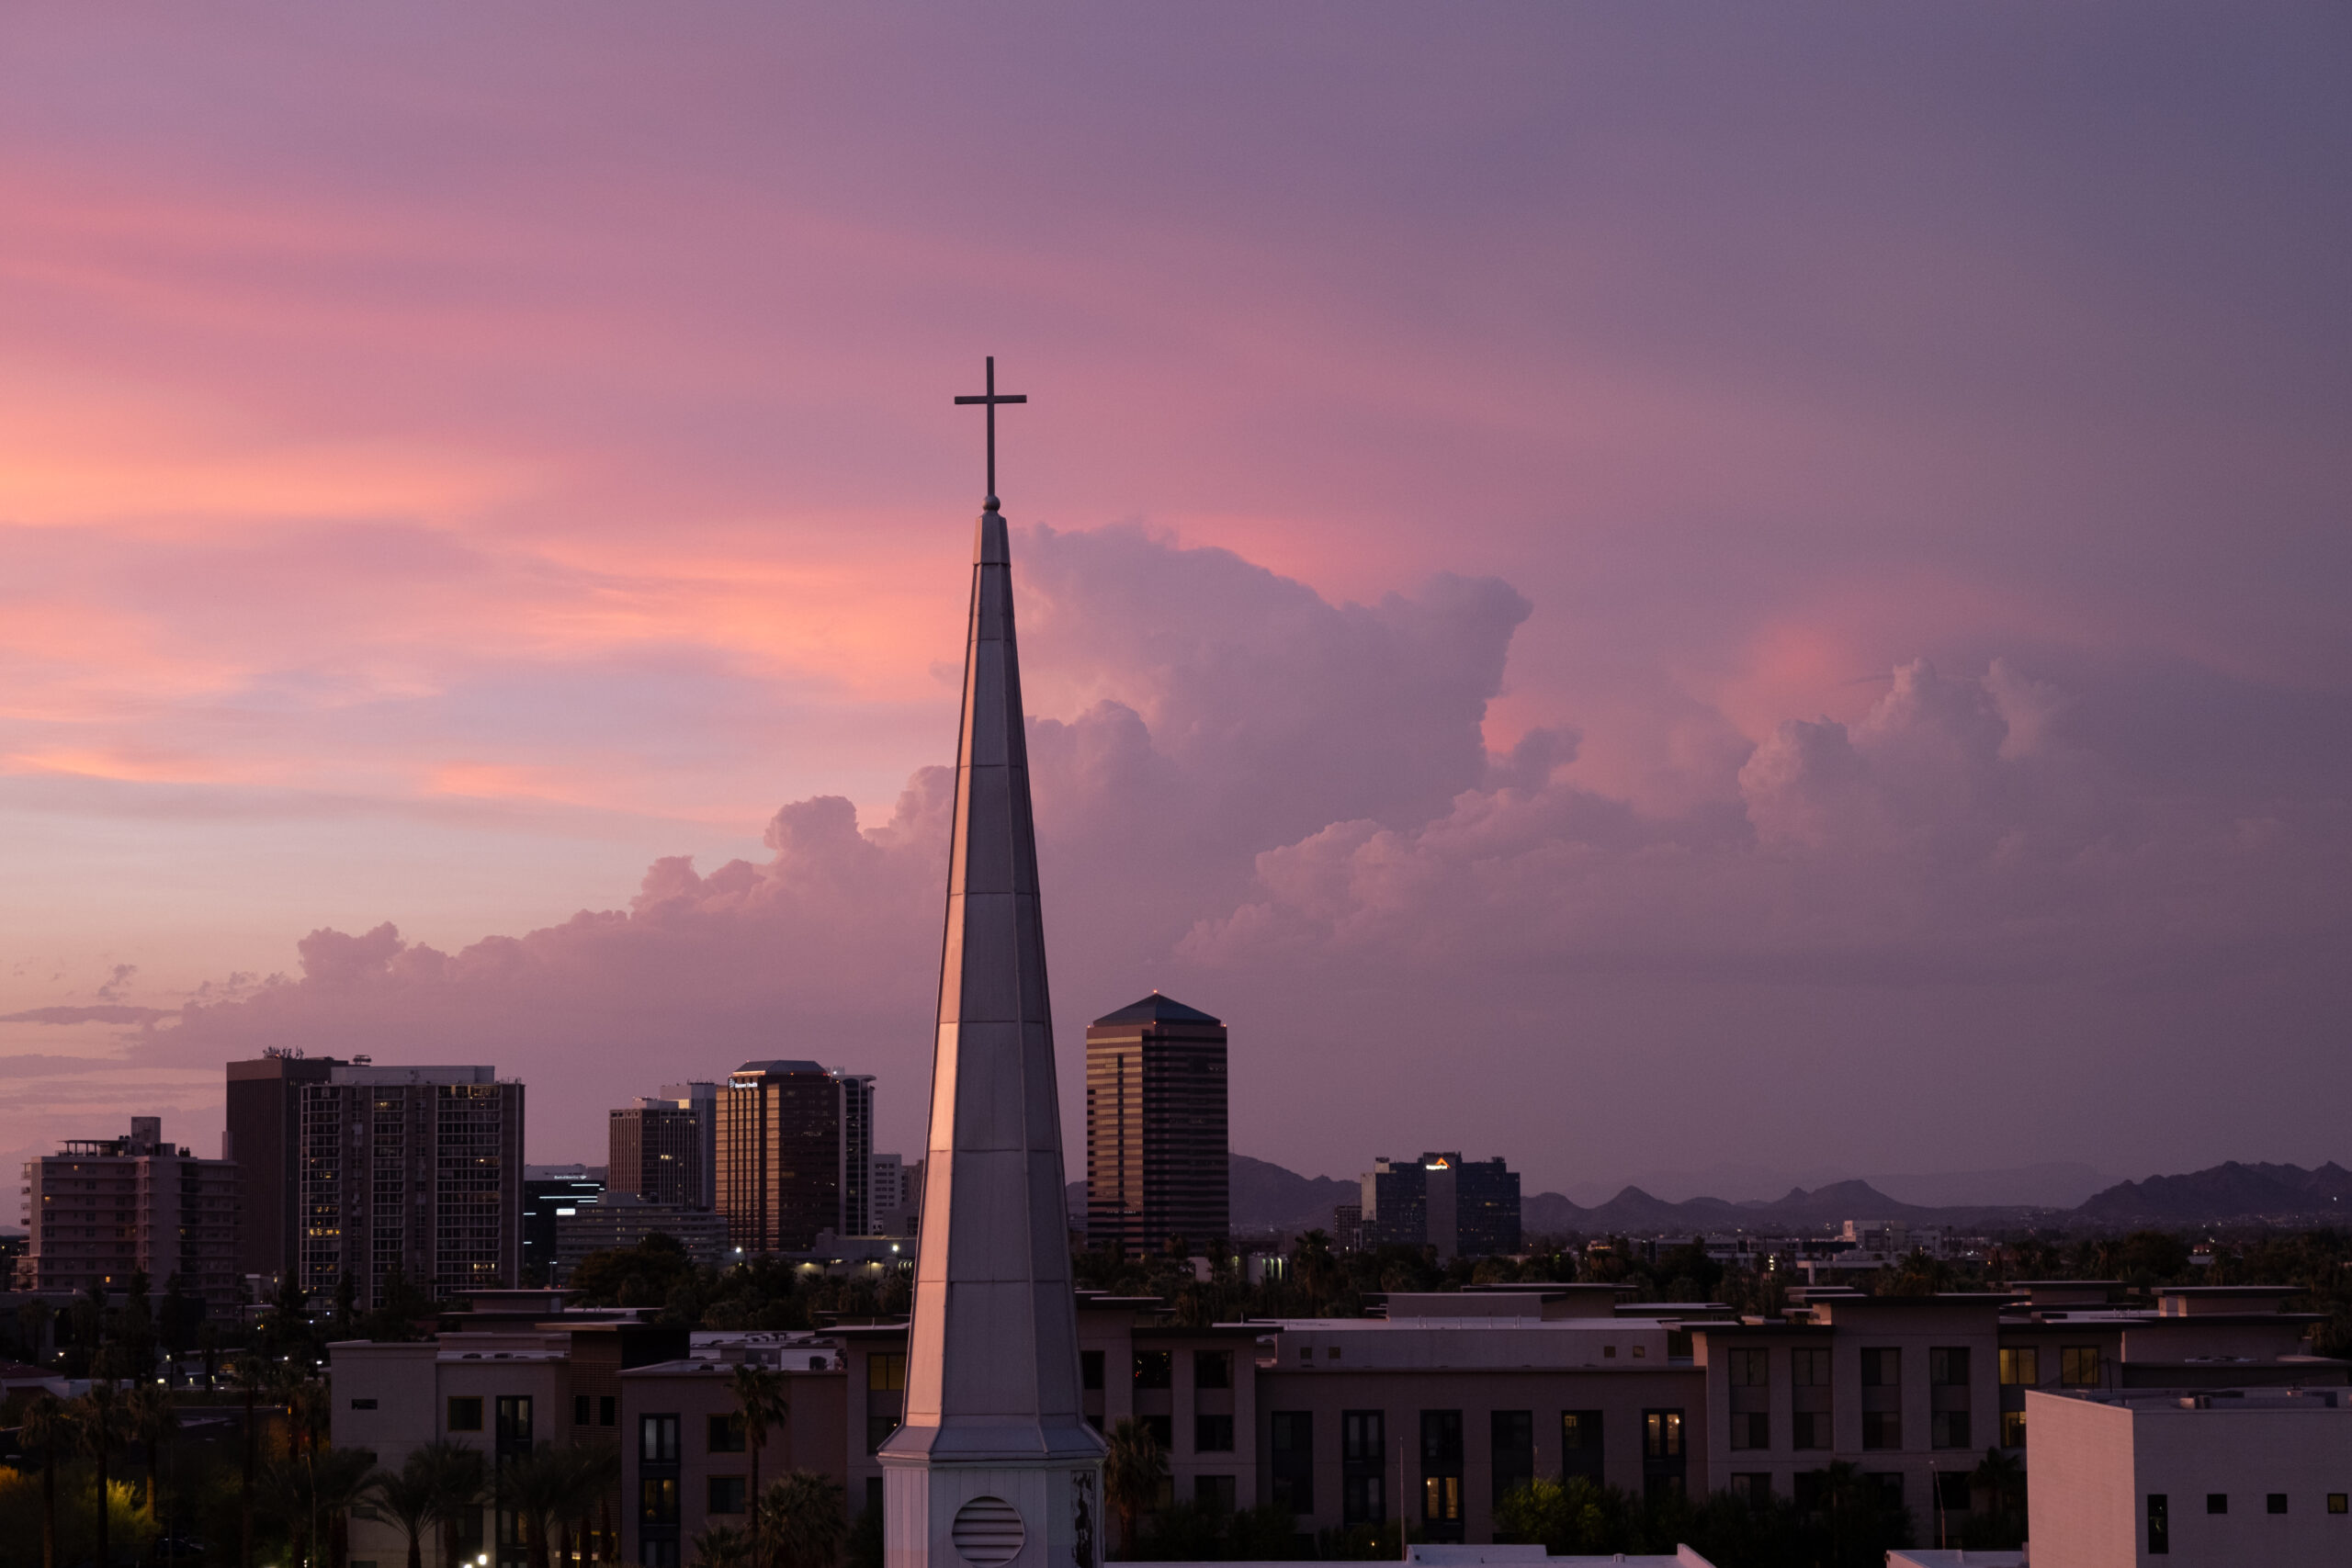 A photo of a church spire at sunset with purple clouds in the background